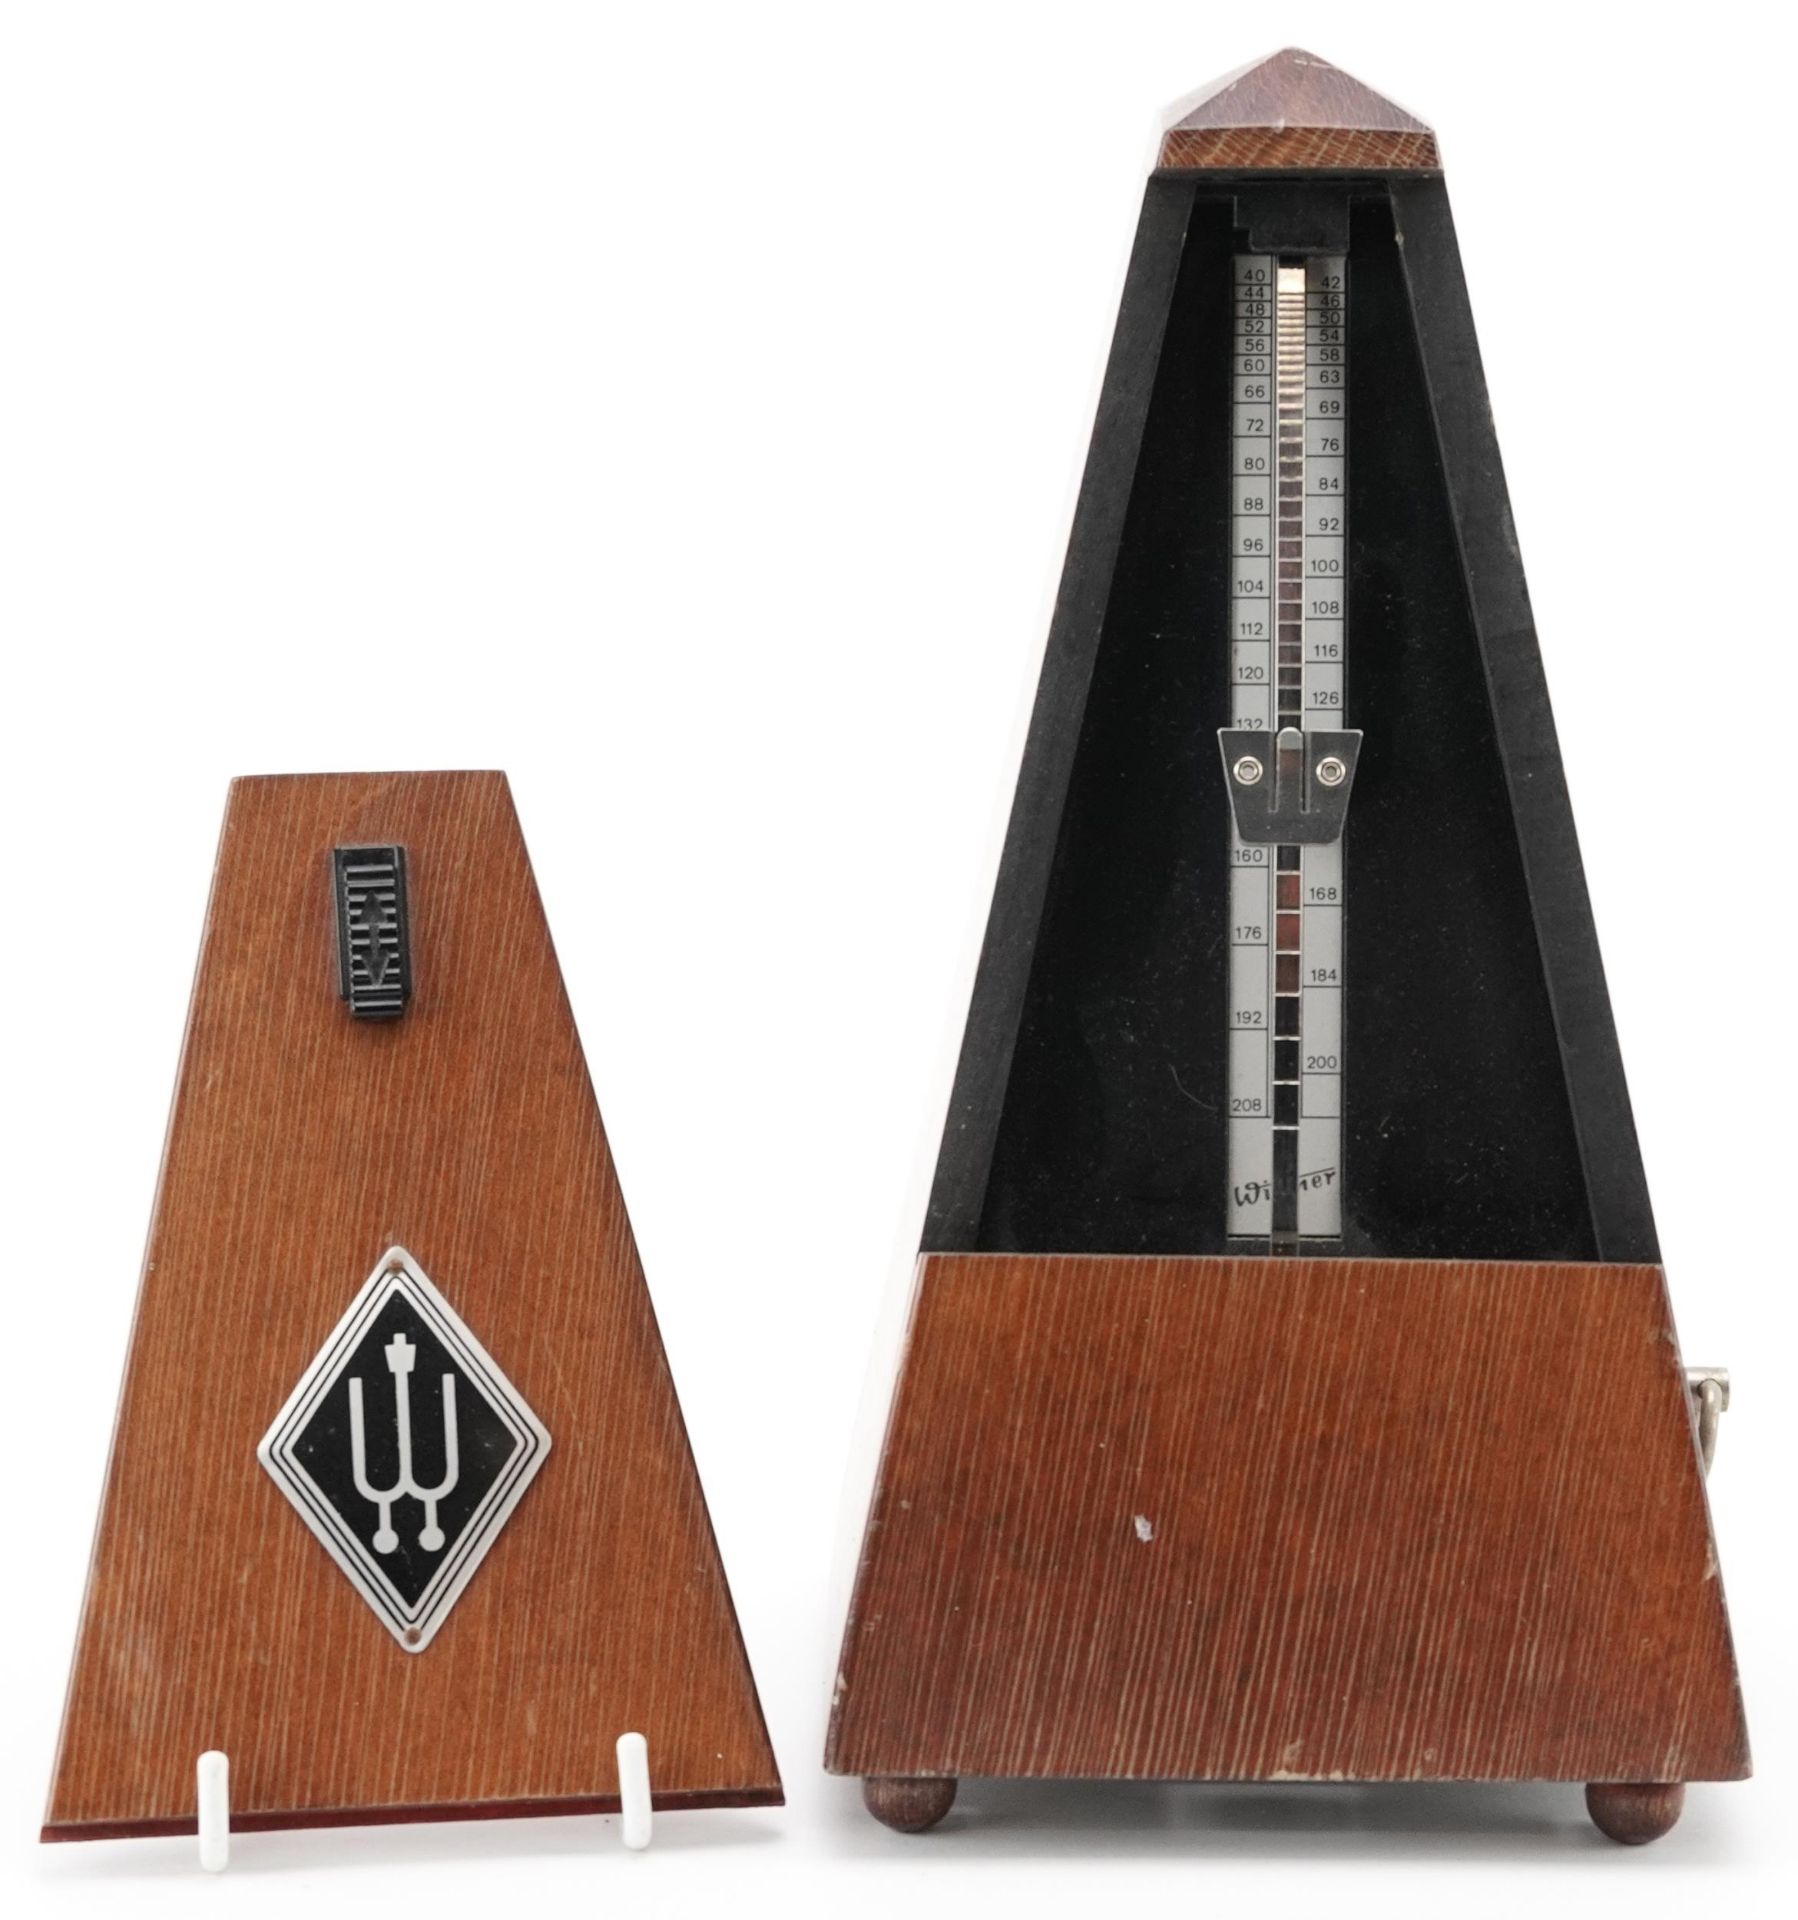 Wooden cased metronome made in Denmark, 22cm high For further information on this lot please contact